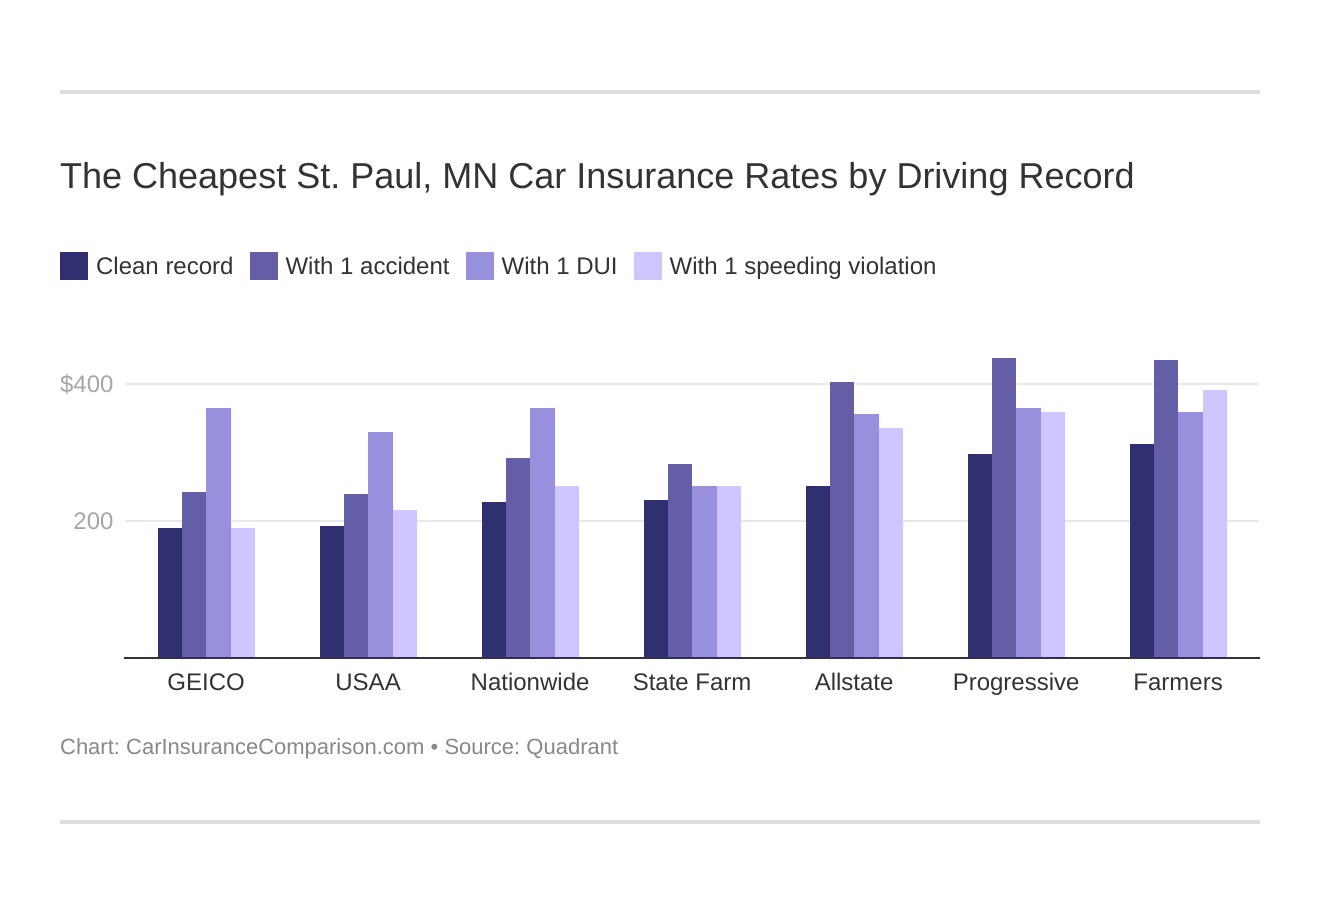 The Cheapest St. Paul, MN Car Insurance Rates by Driving Record